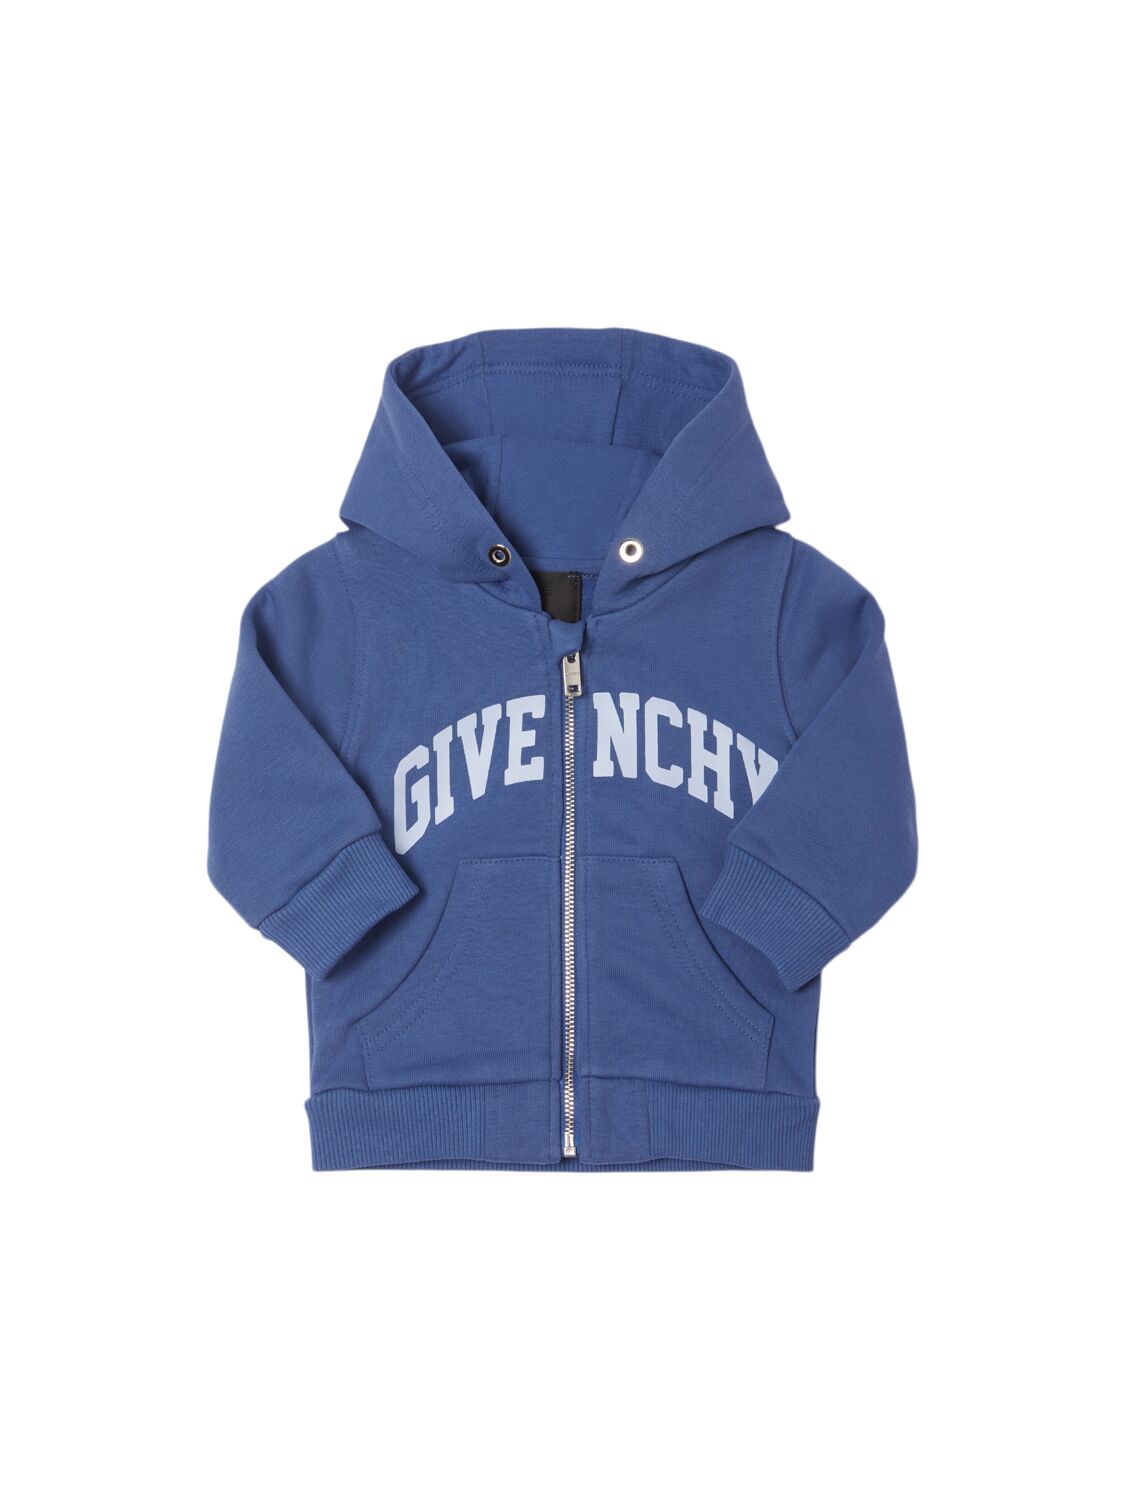 Givenchy Printed Cotton Blend Zip-up Sweatshirt In Blue